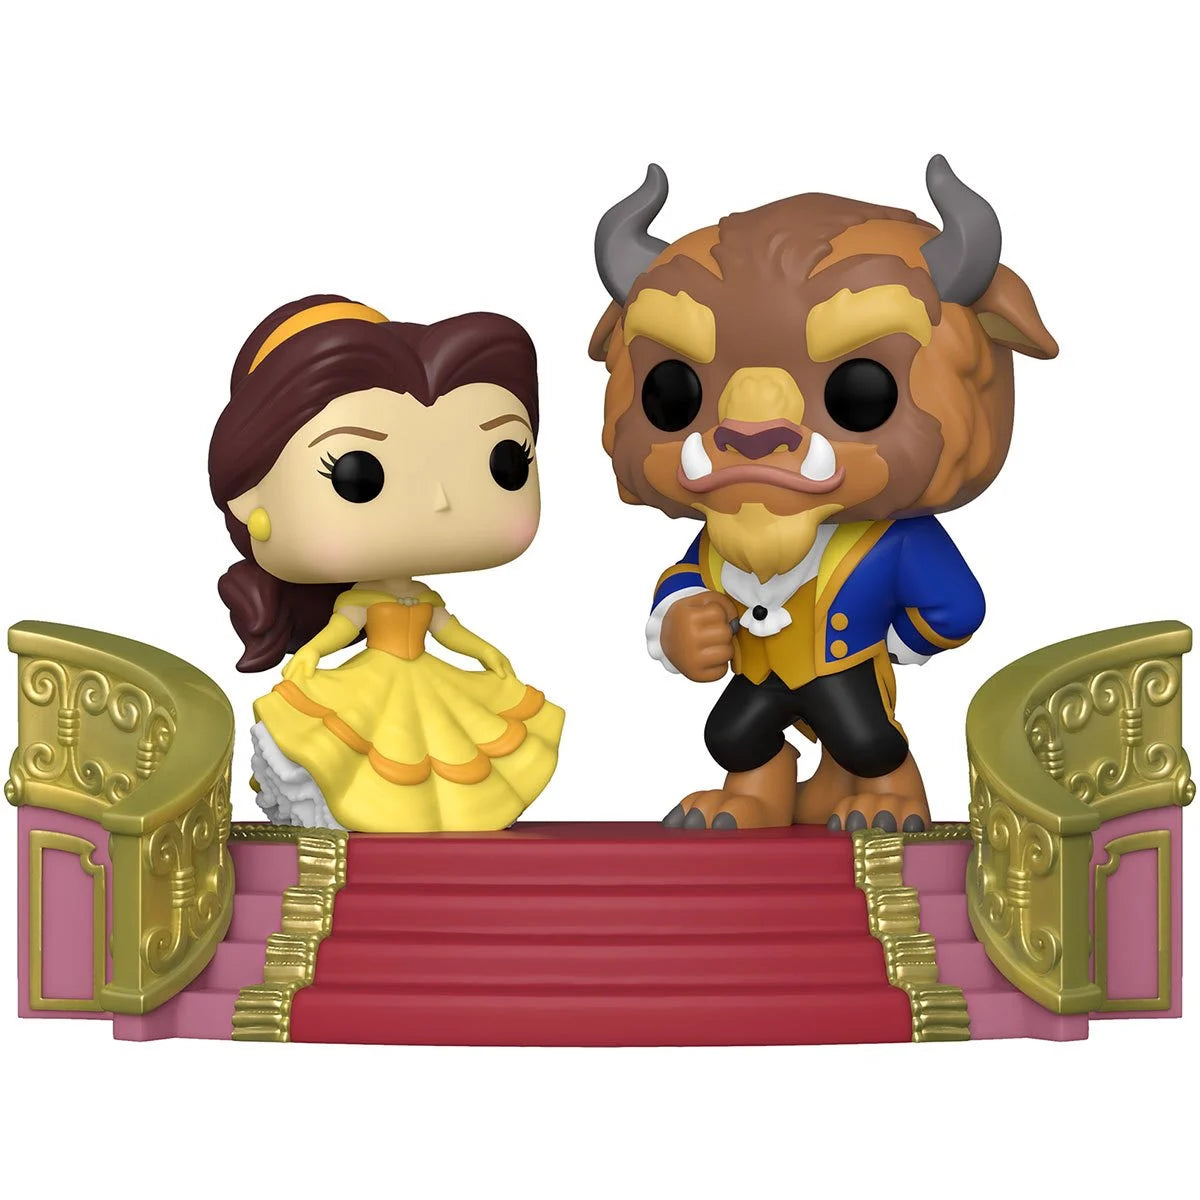 Beauty and the Beast Formal Belle and Beast Pop! Moment